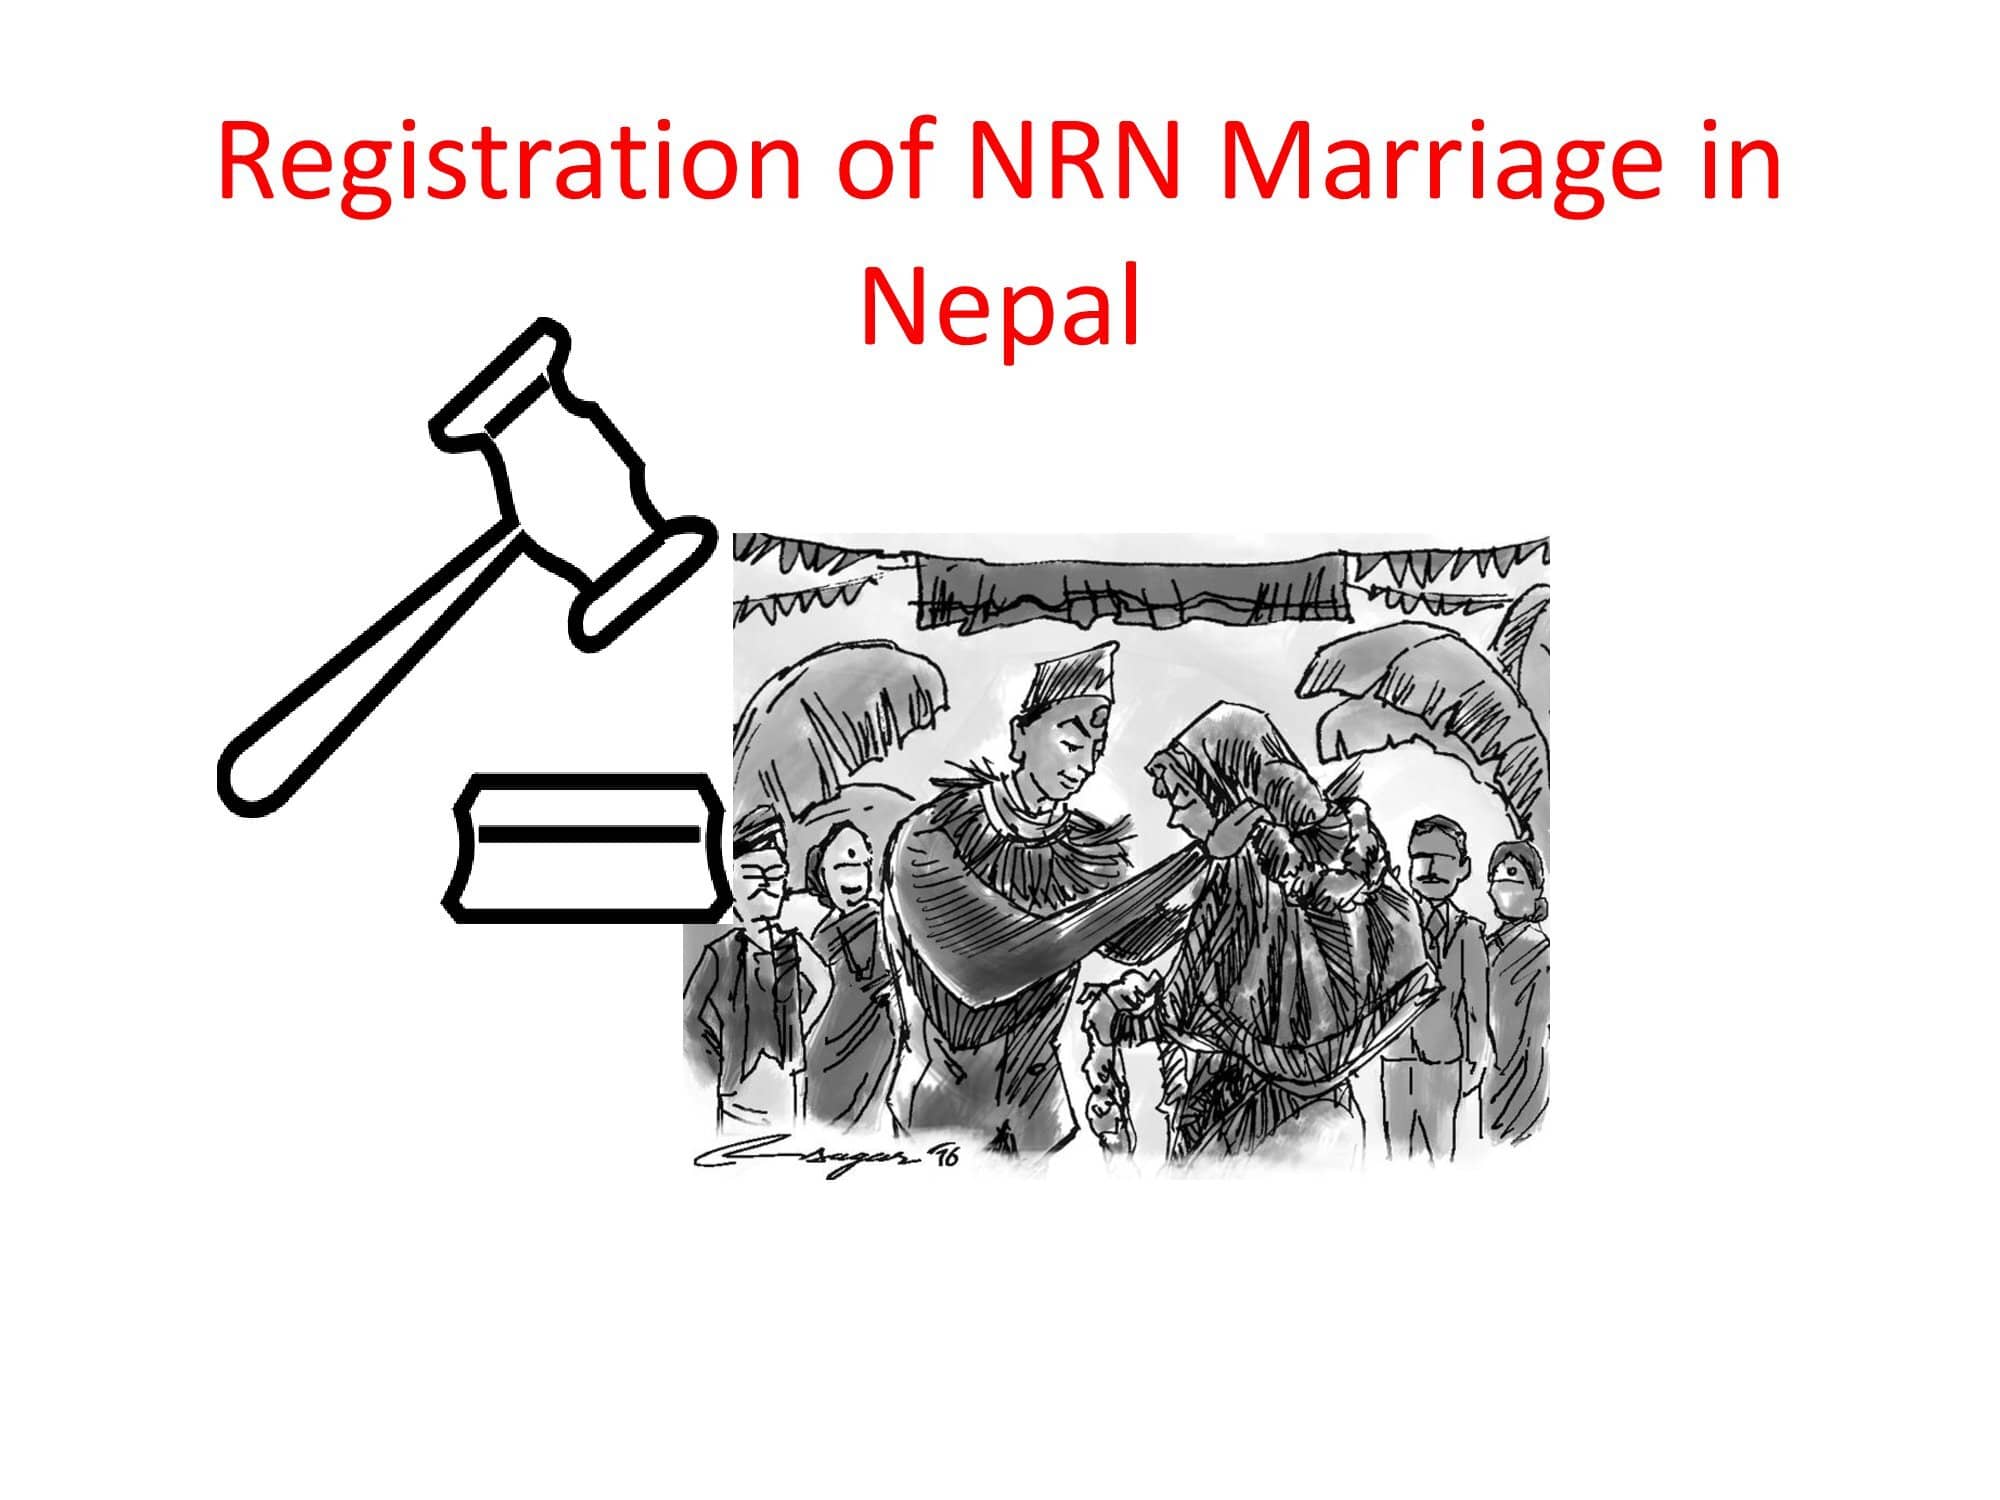 Q/A about NRN Marriage in Nepal